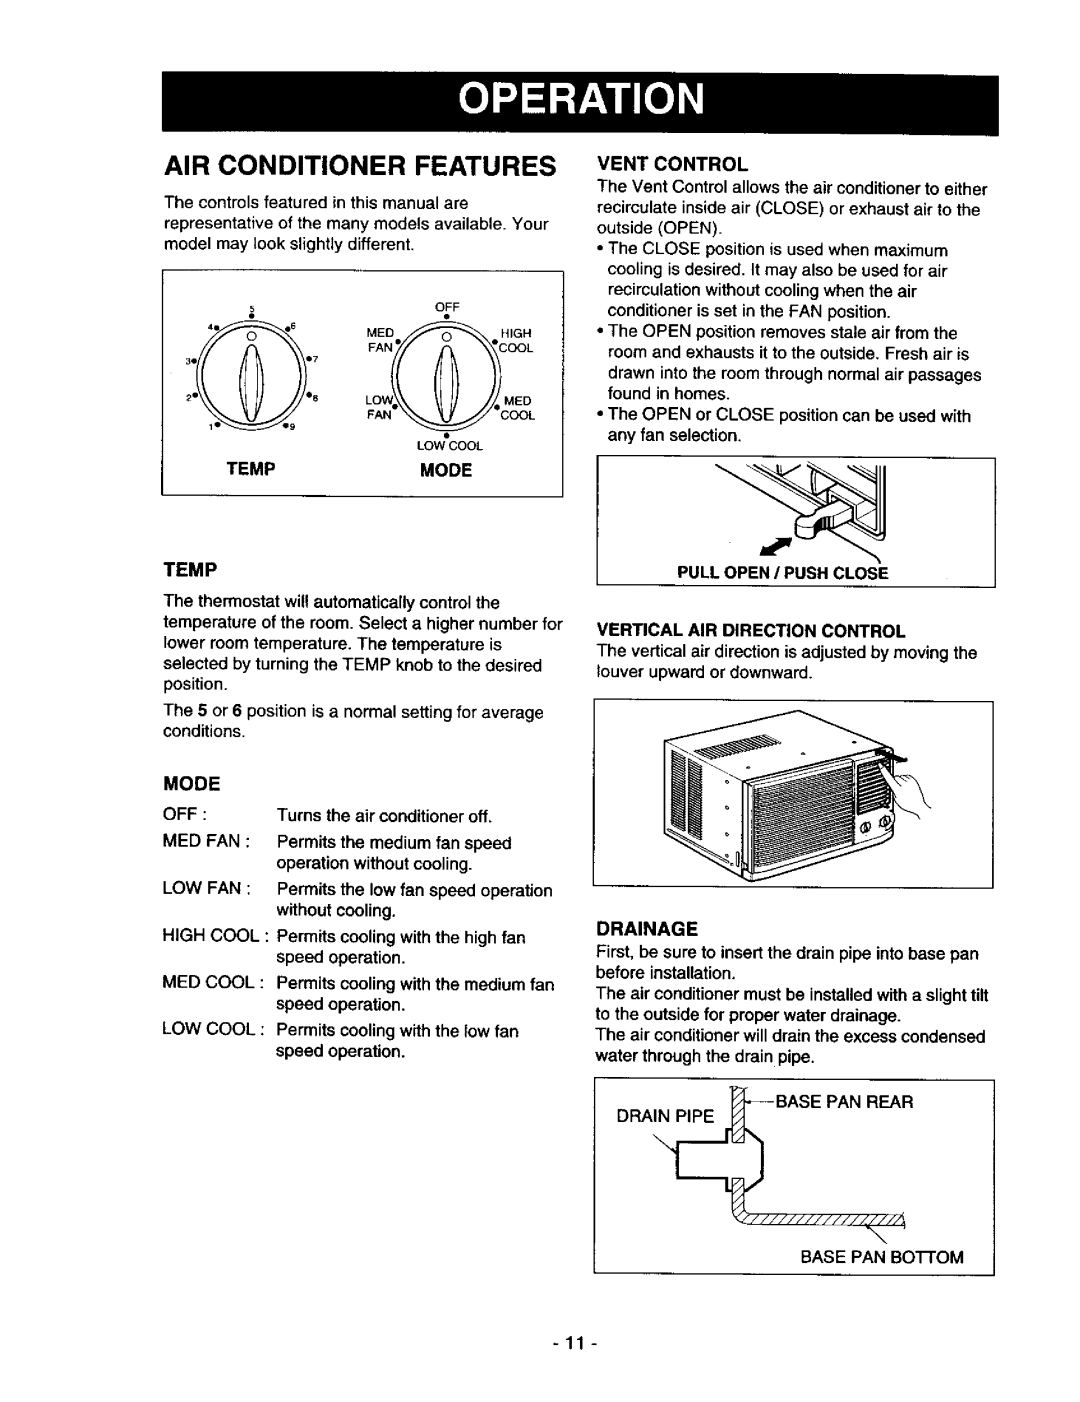 Kenmore 78122 owner manual Air Conditioner Features 